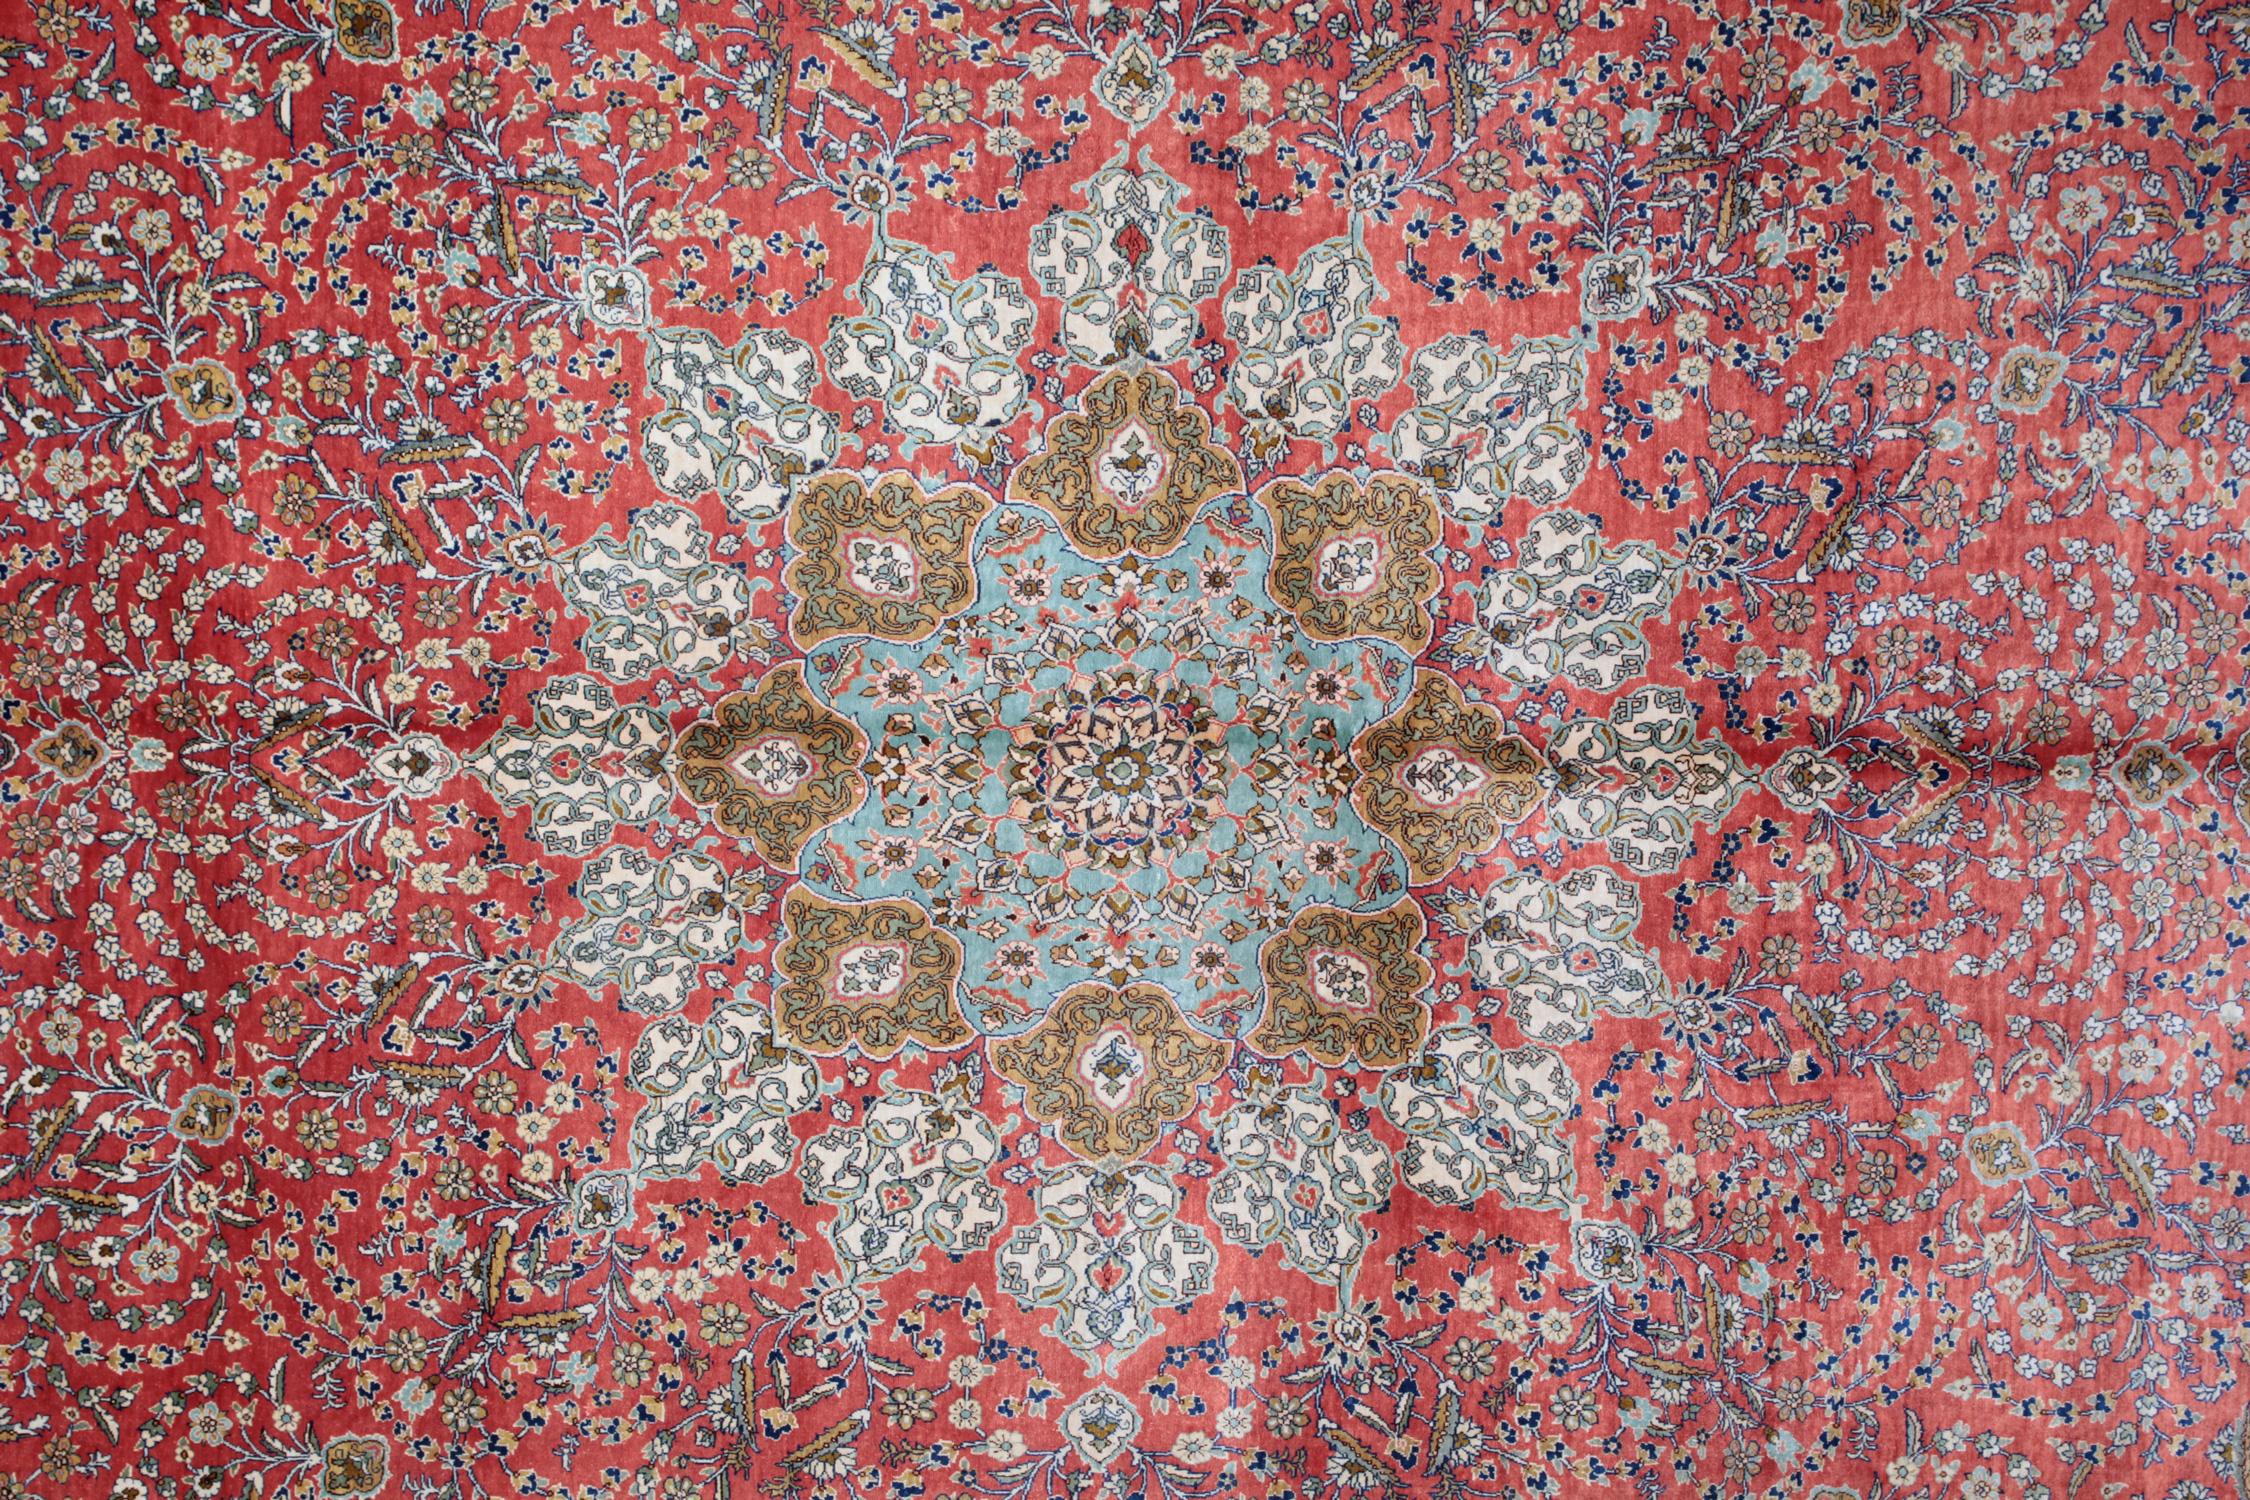 Vintage handmade carpet Turkish rugs are considered by many to be one of the most beautiful handmade carpets in the world. This elegant Orange rug has a very nice palette of colours such as rust, light blue, navy, beige, gold and orange-pink. The